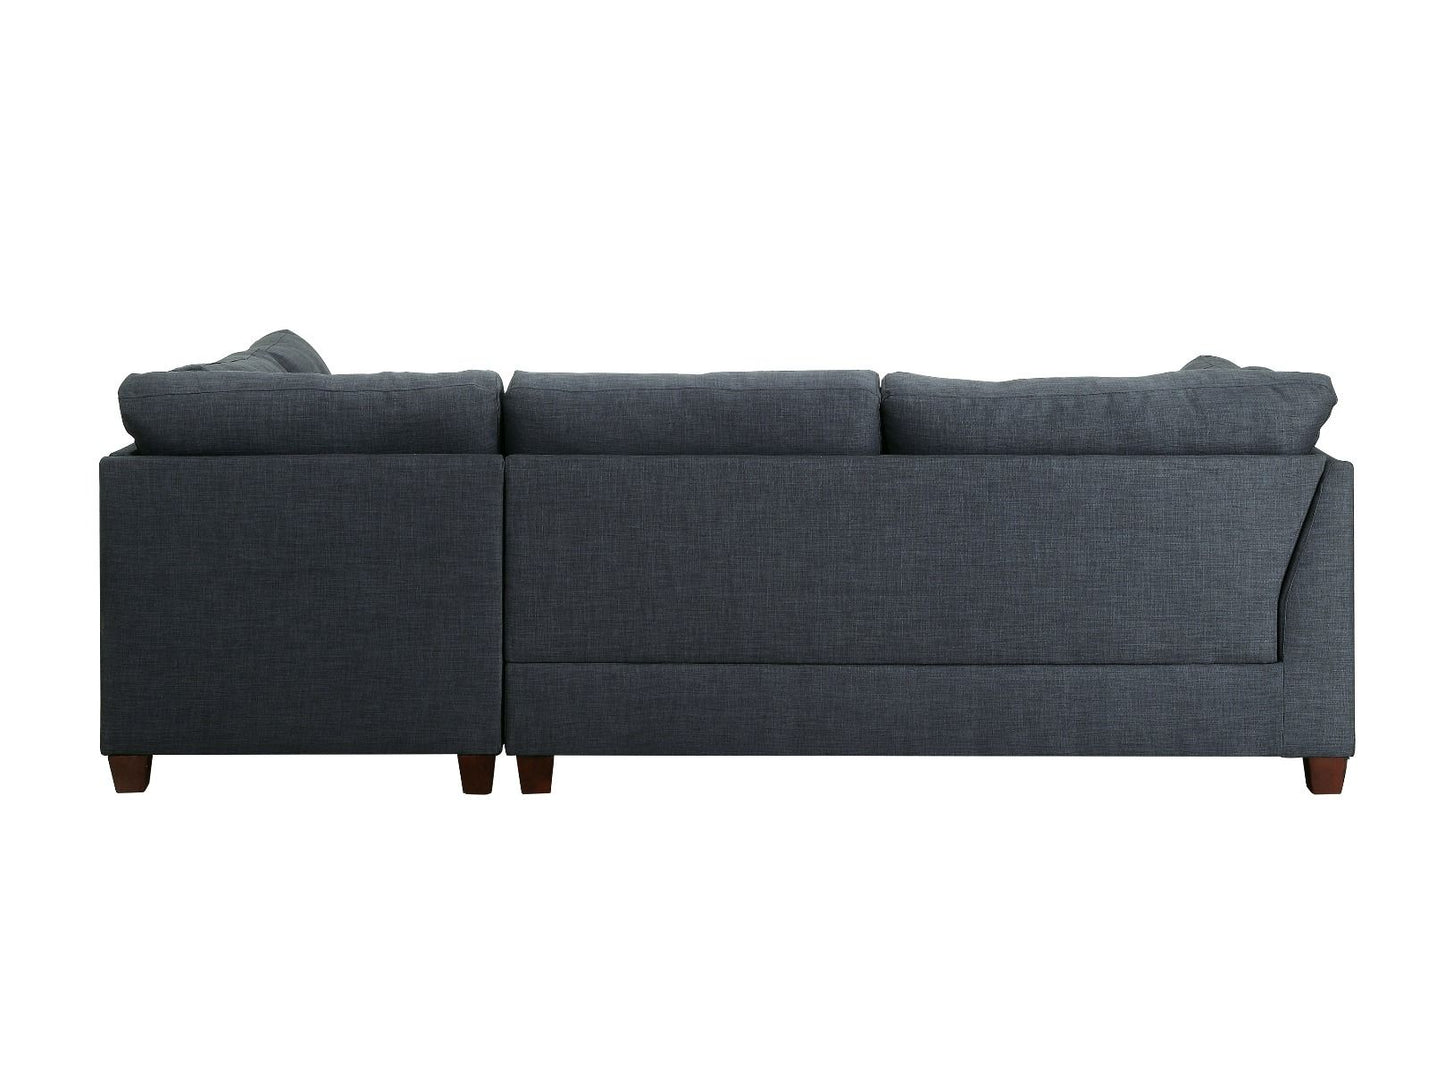 Laurissa Sectional RAF only GREY